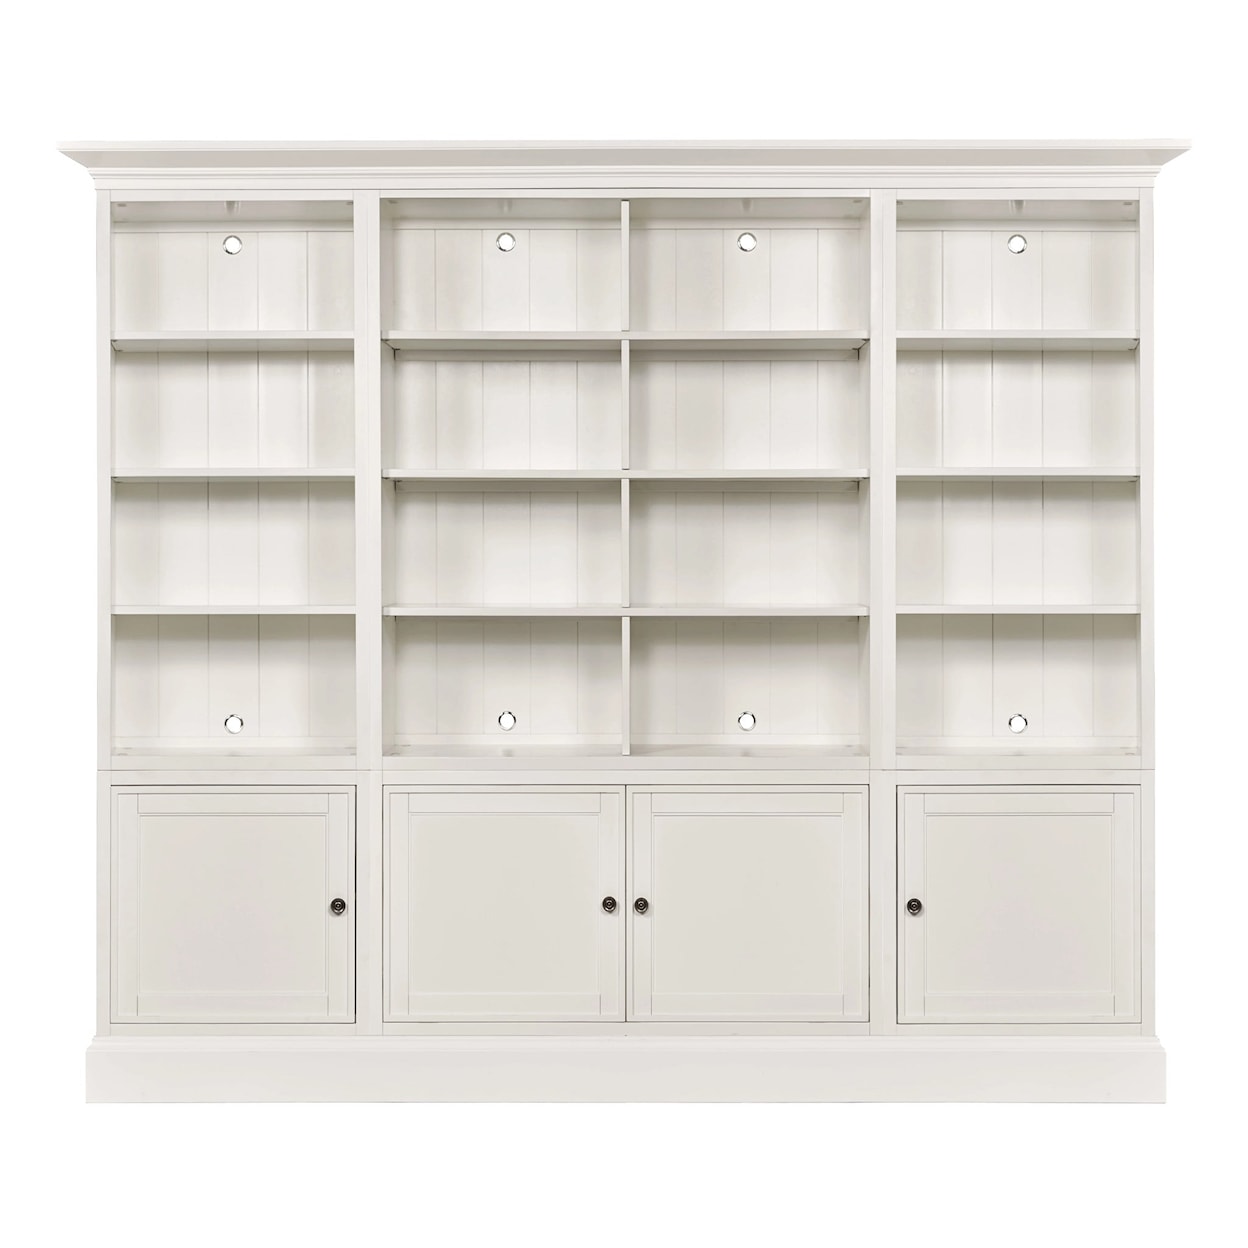 Hammary Structures Quad Display Bookcase